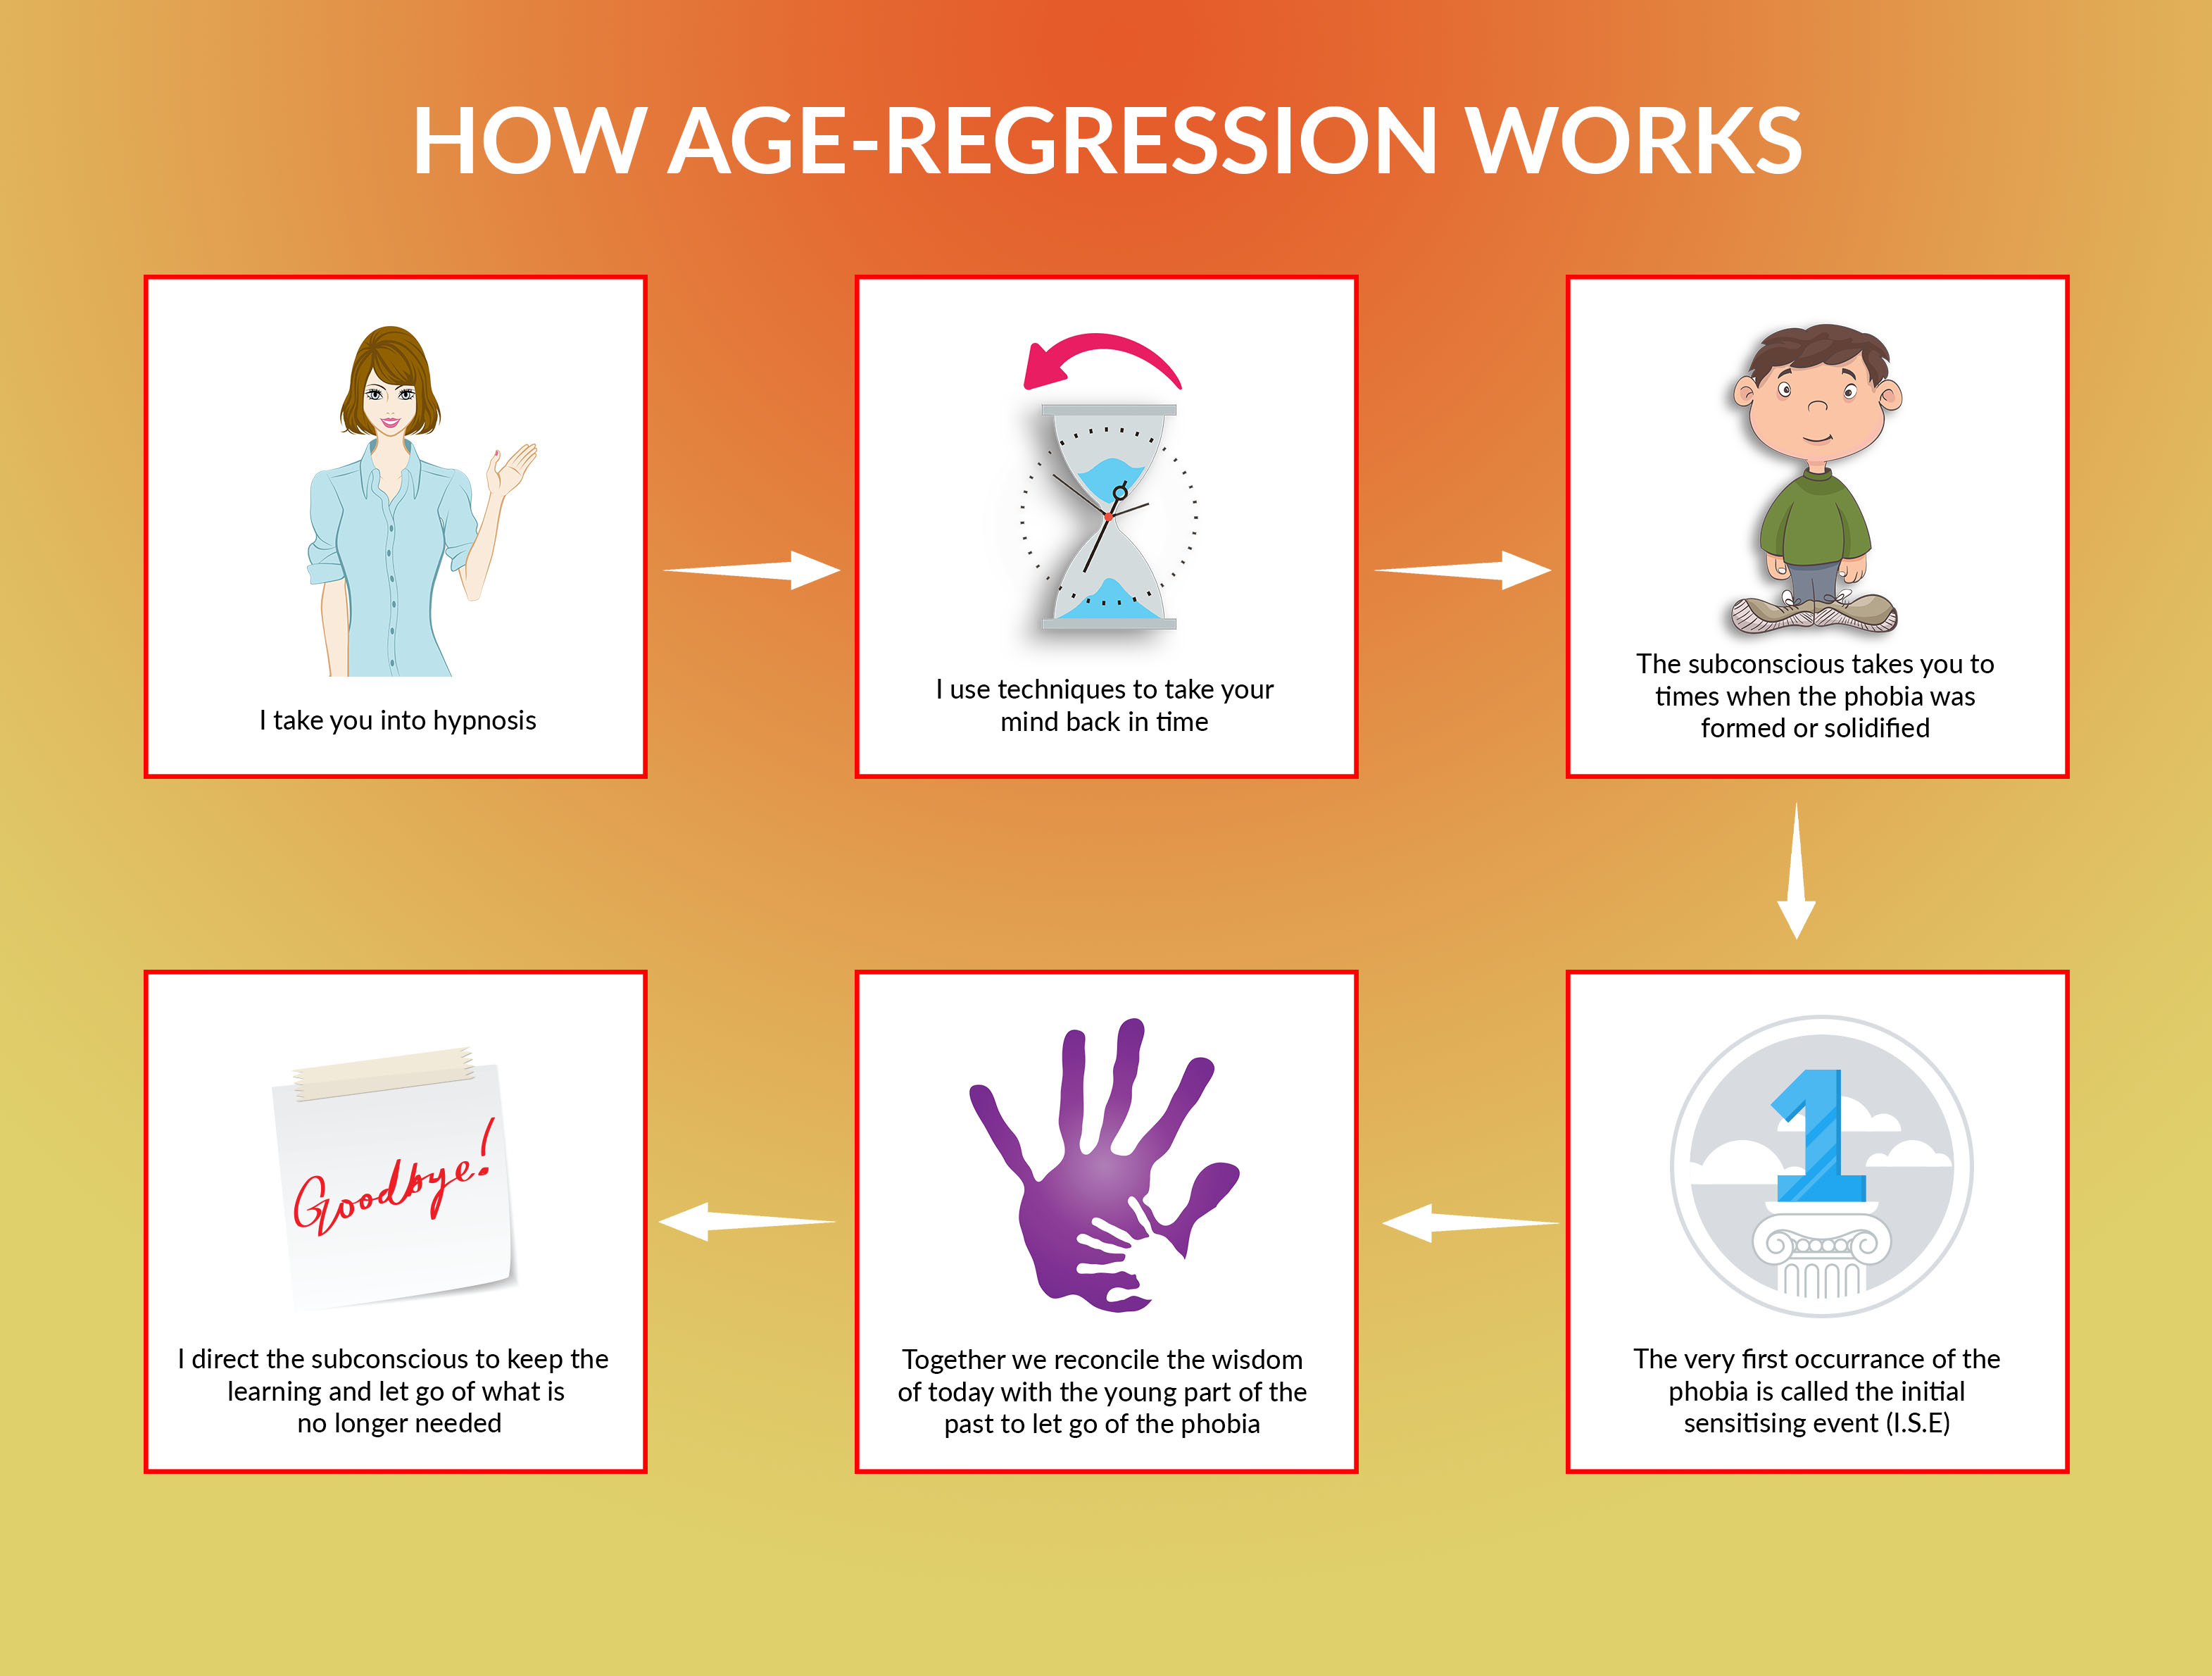 The mechanisms of age regression in hypnosis